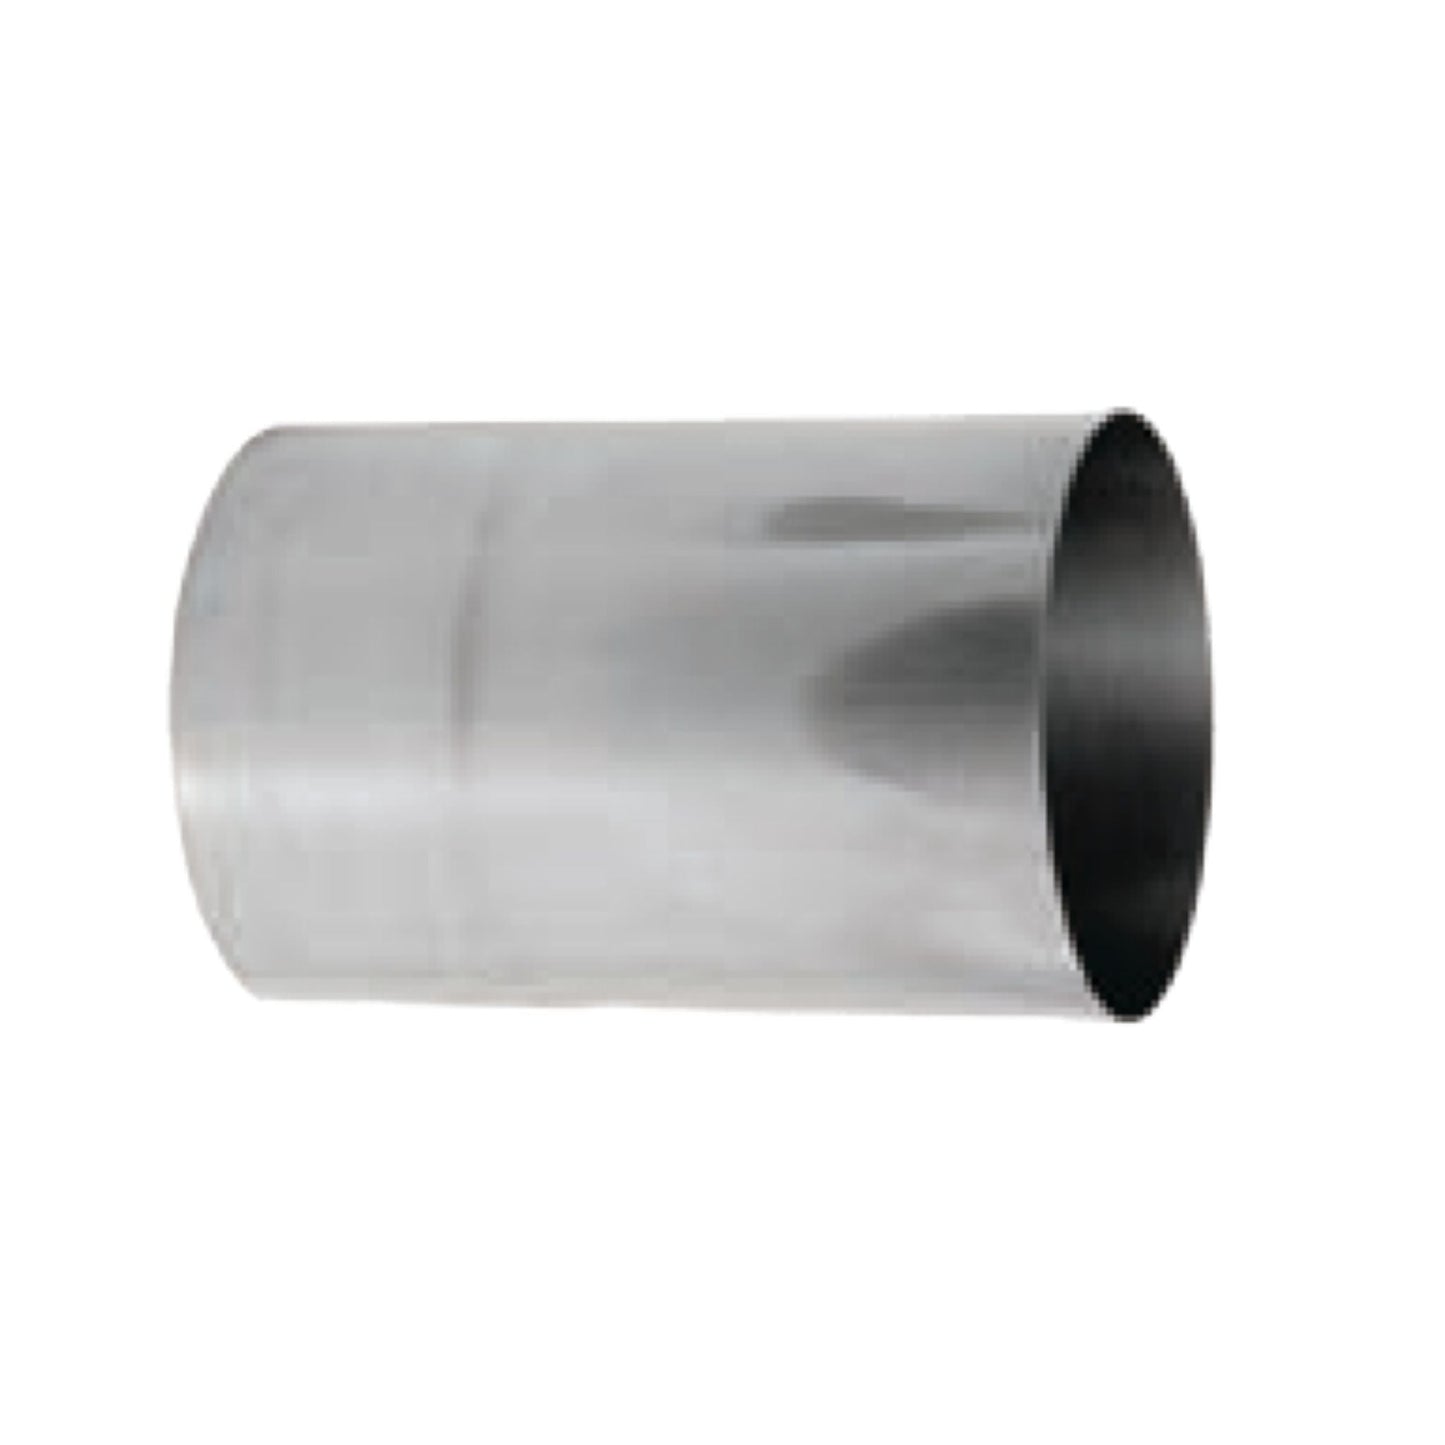 DuraVent FasNSeal 10" 29-4C Stainless Steel Wall Thimble Sleeve Extension